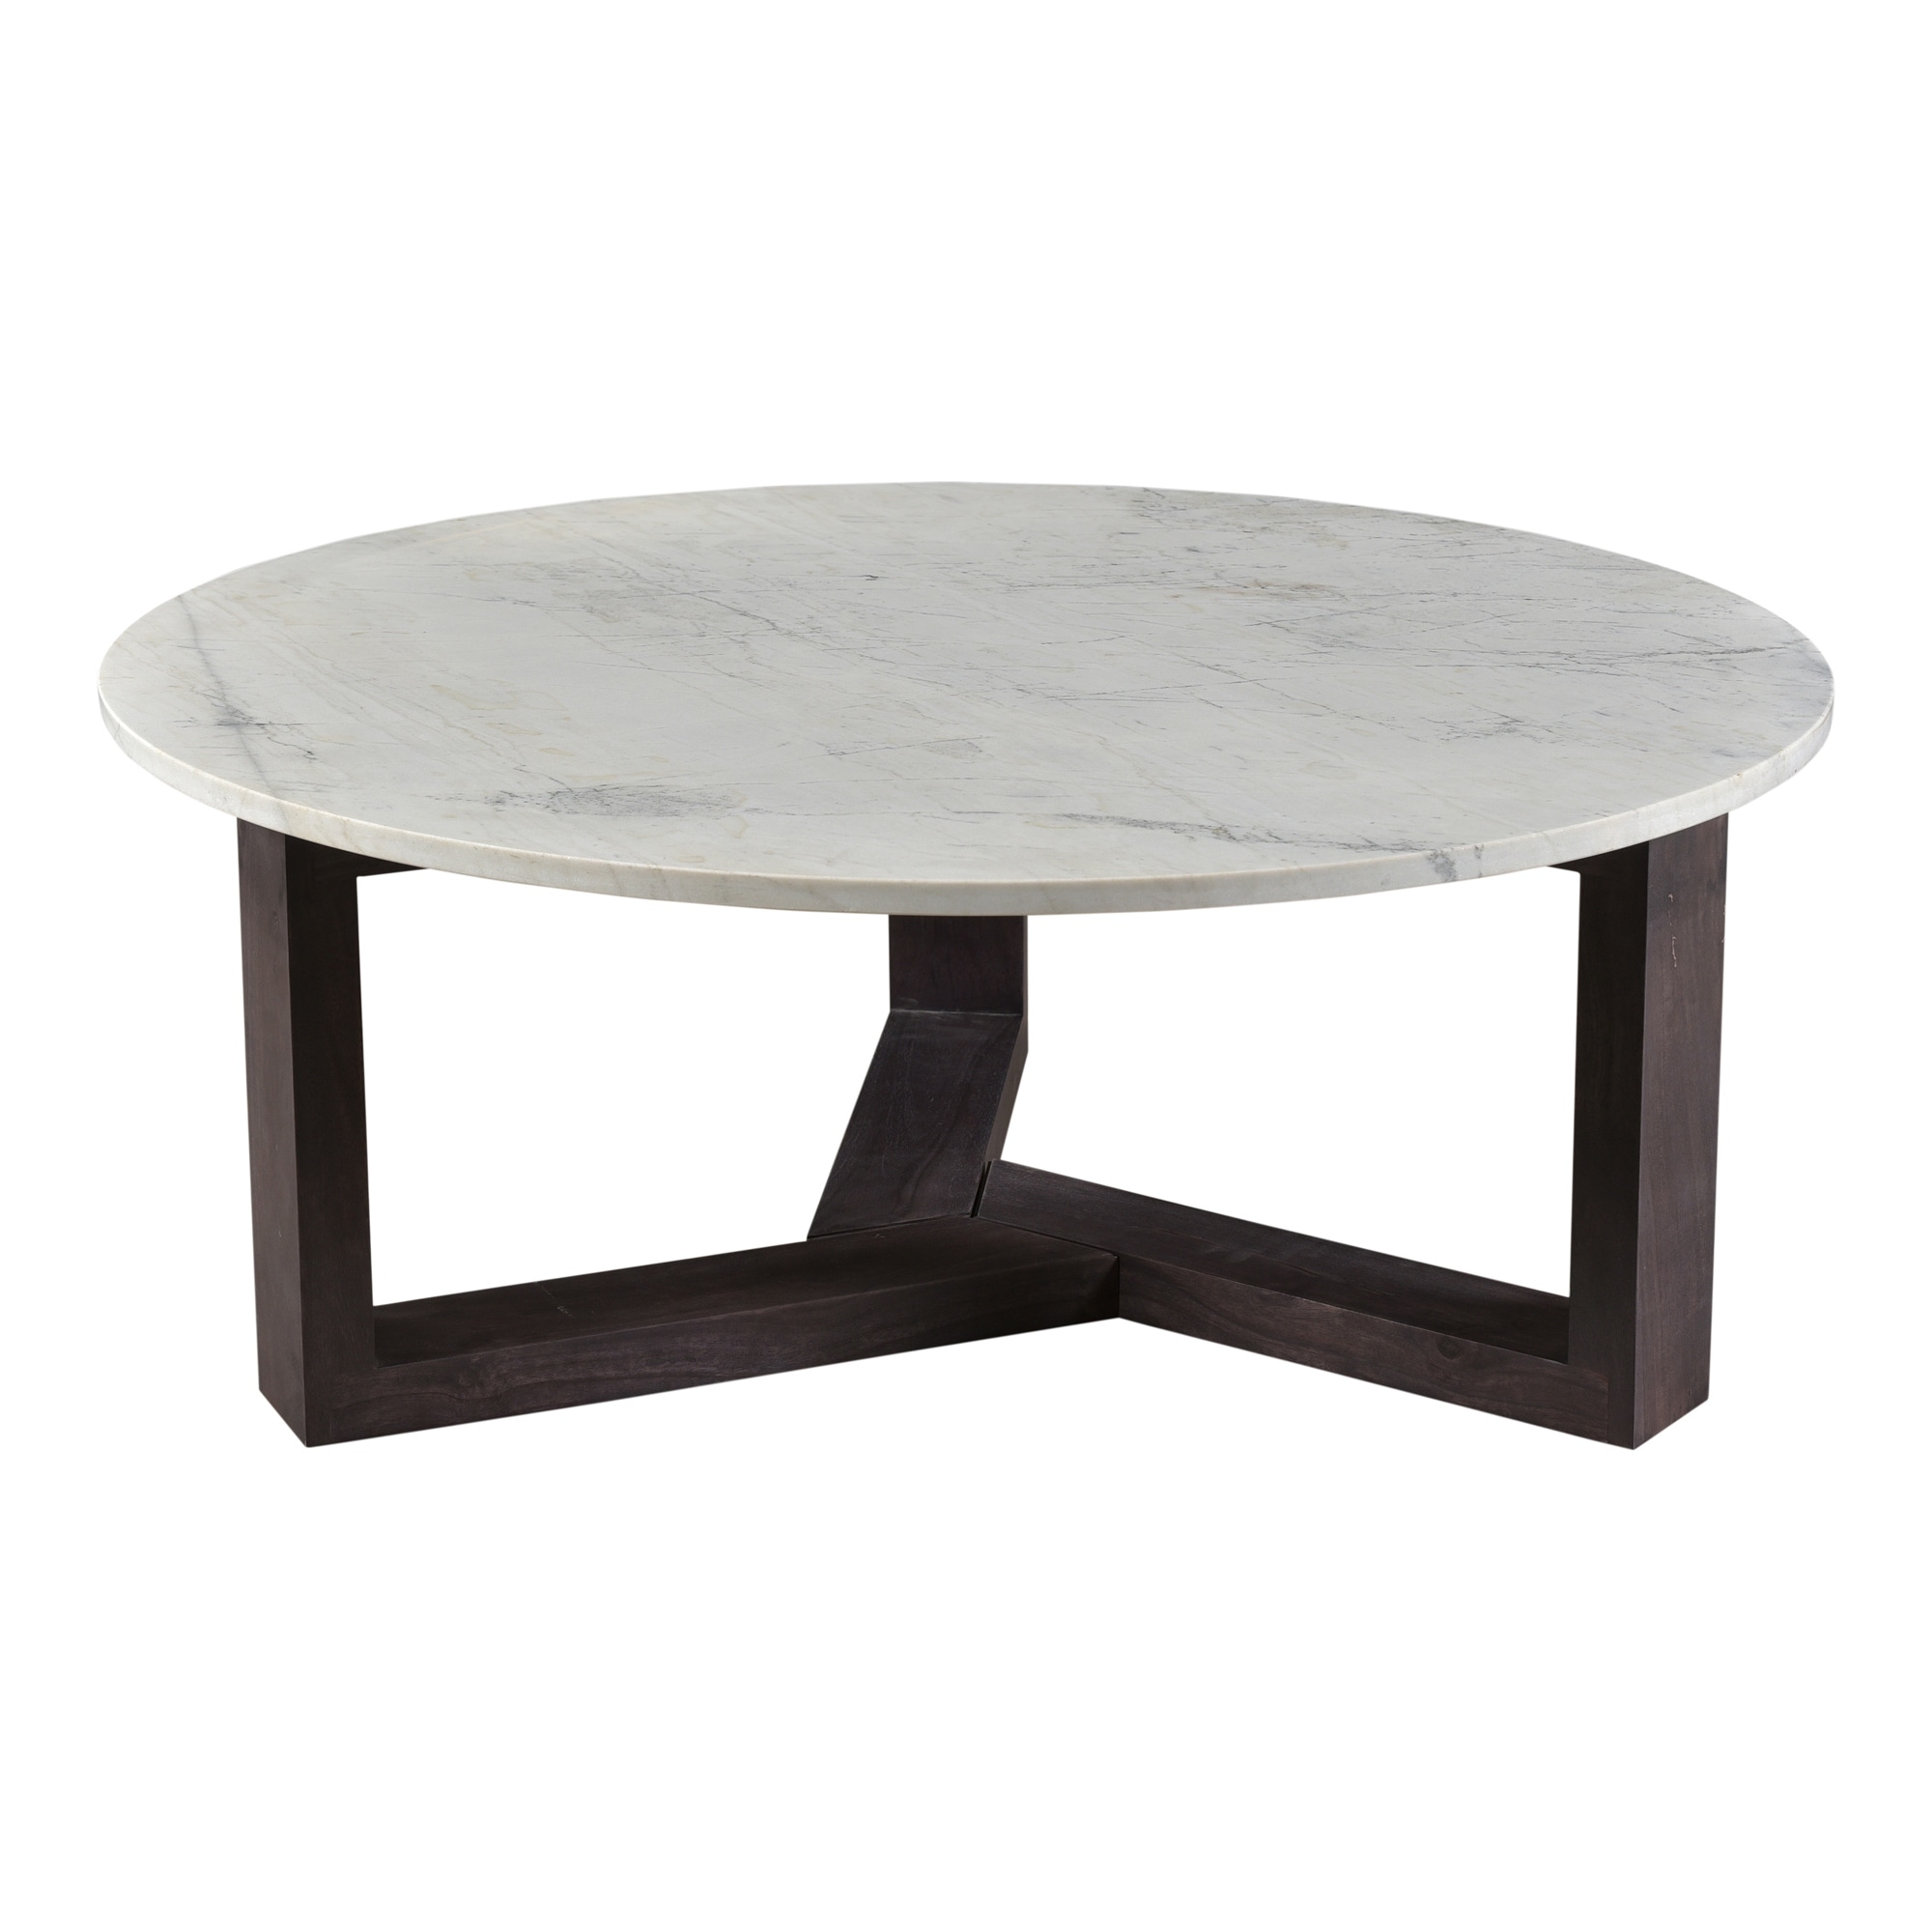 Aurelle Home Jayda Modern Marble And Acacia Wood Round Coffee Table 42 Round 42 Round On Sale Overstock 30269864